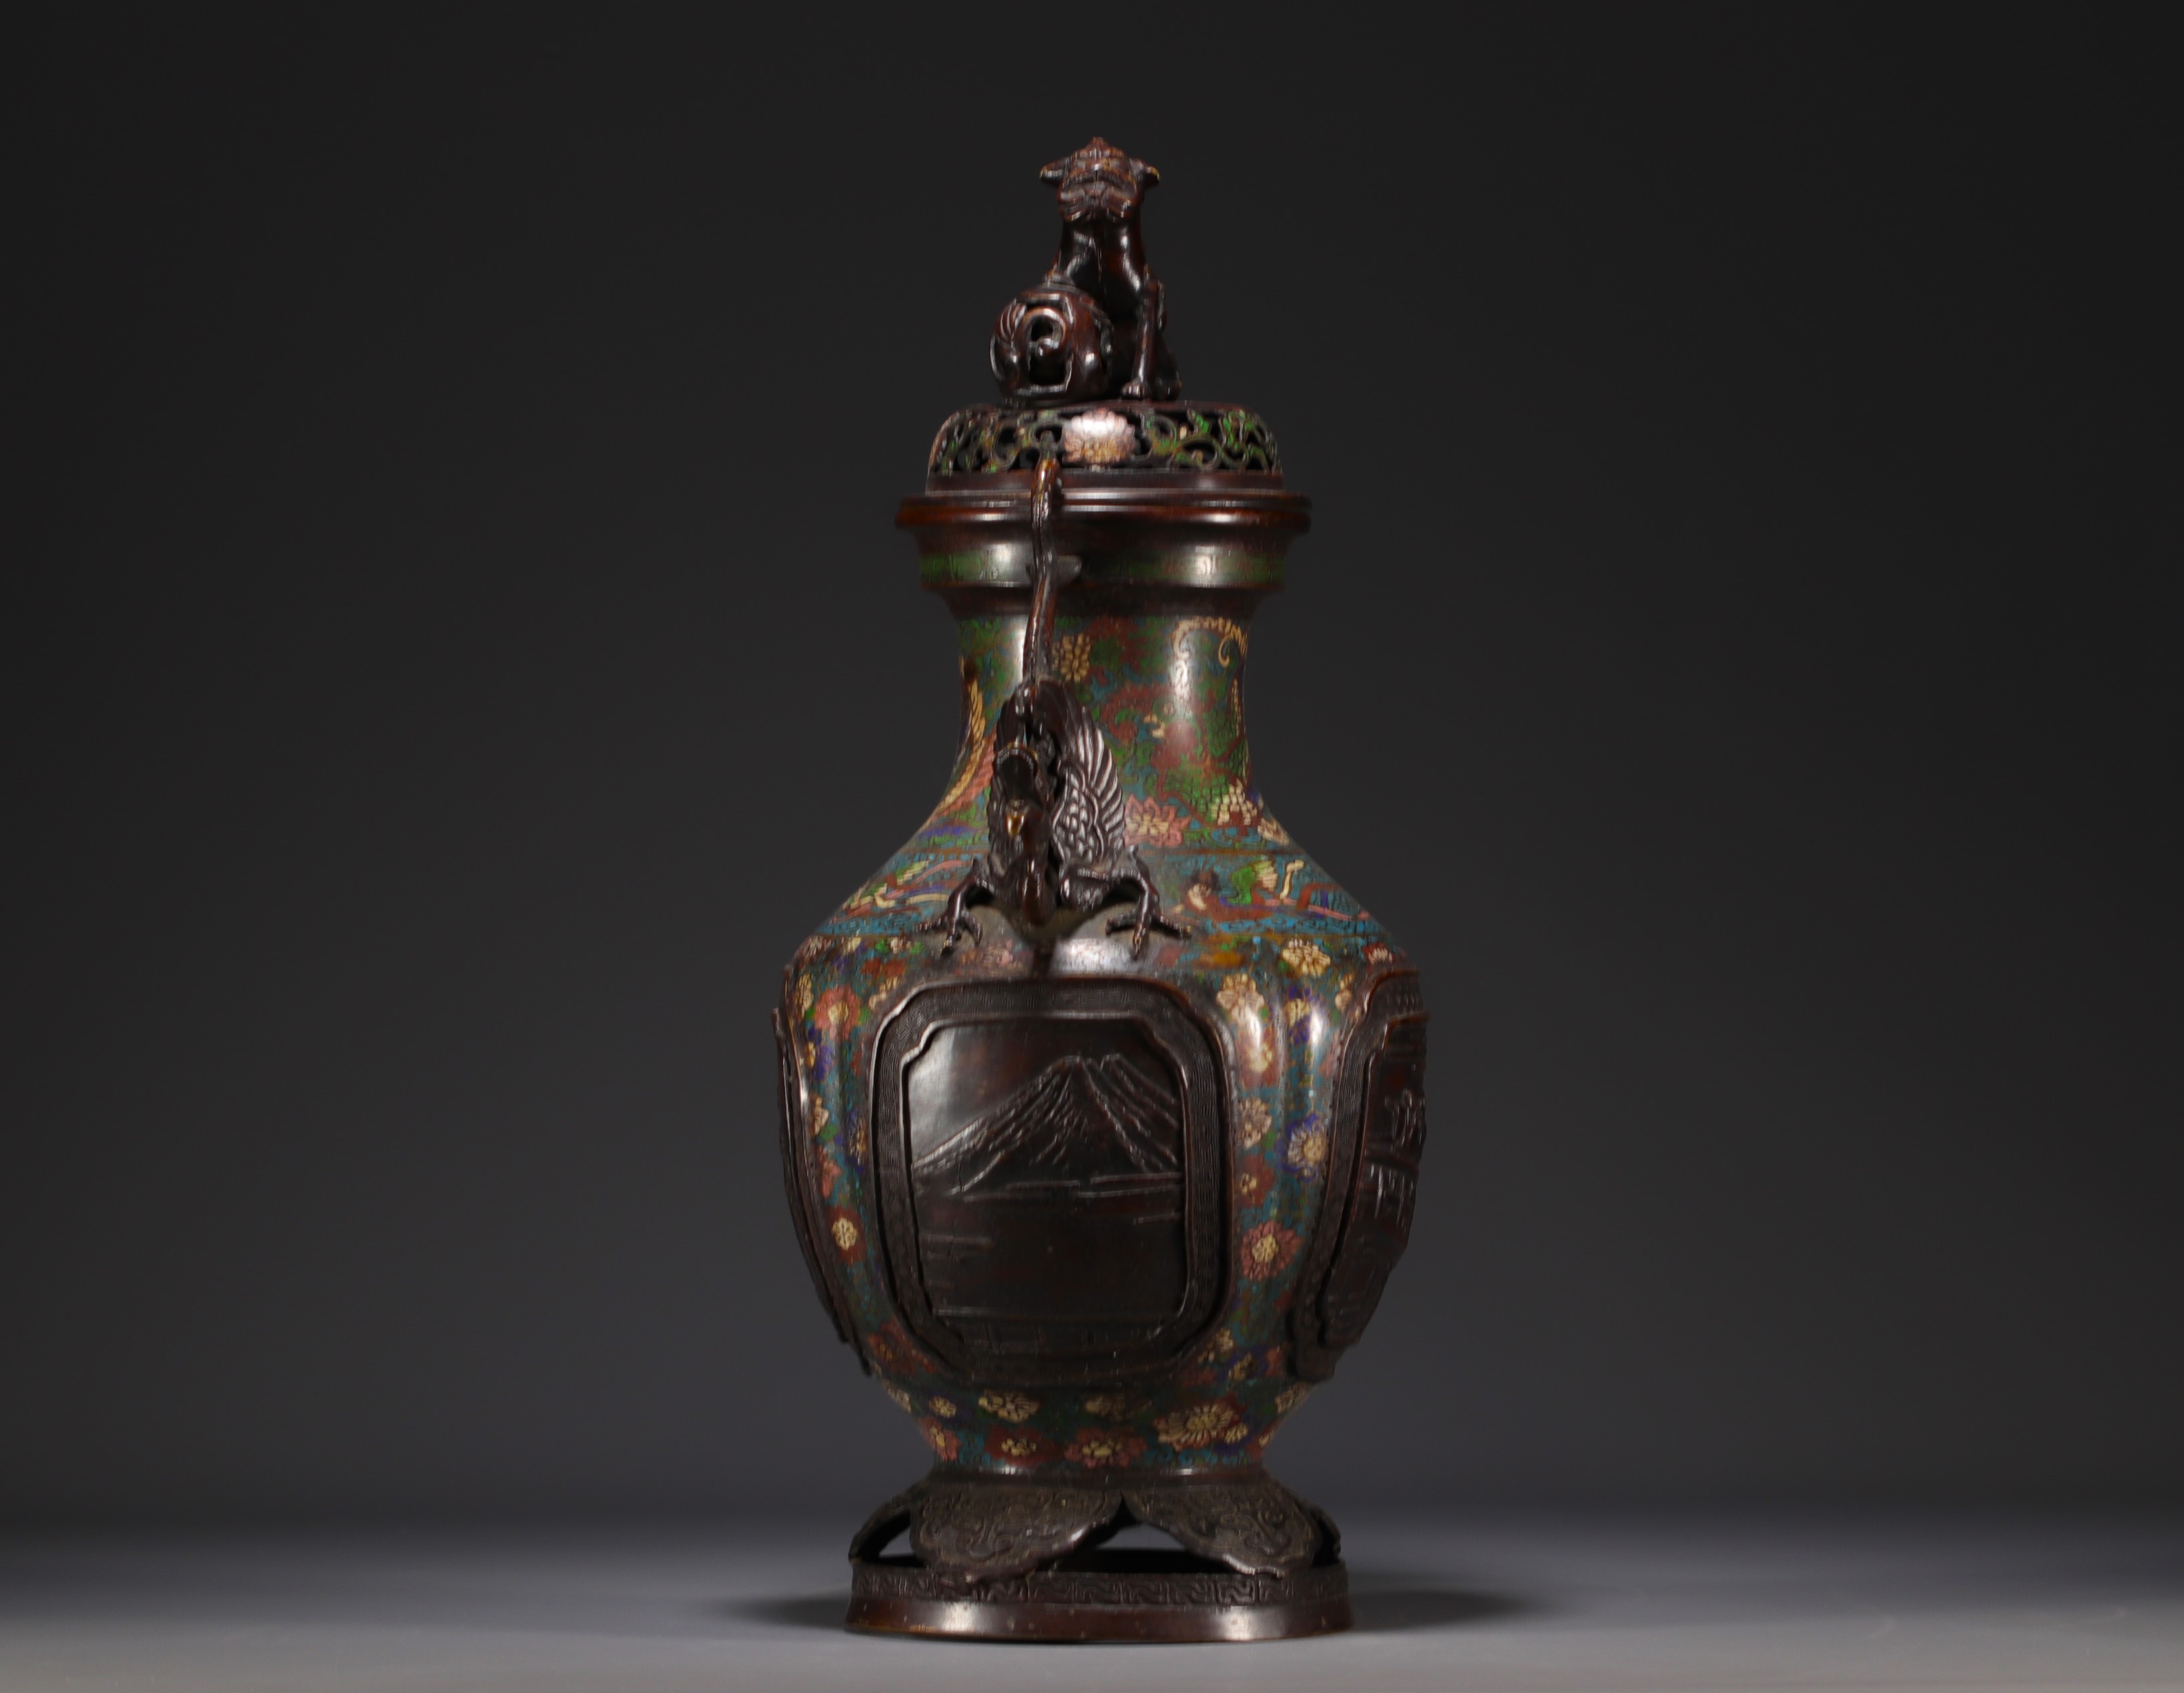 Japan - Cloisonne bronze perfume burner decorated with dragons and chimeras. - Image 2 of 4